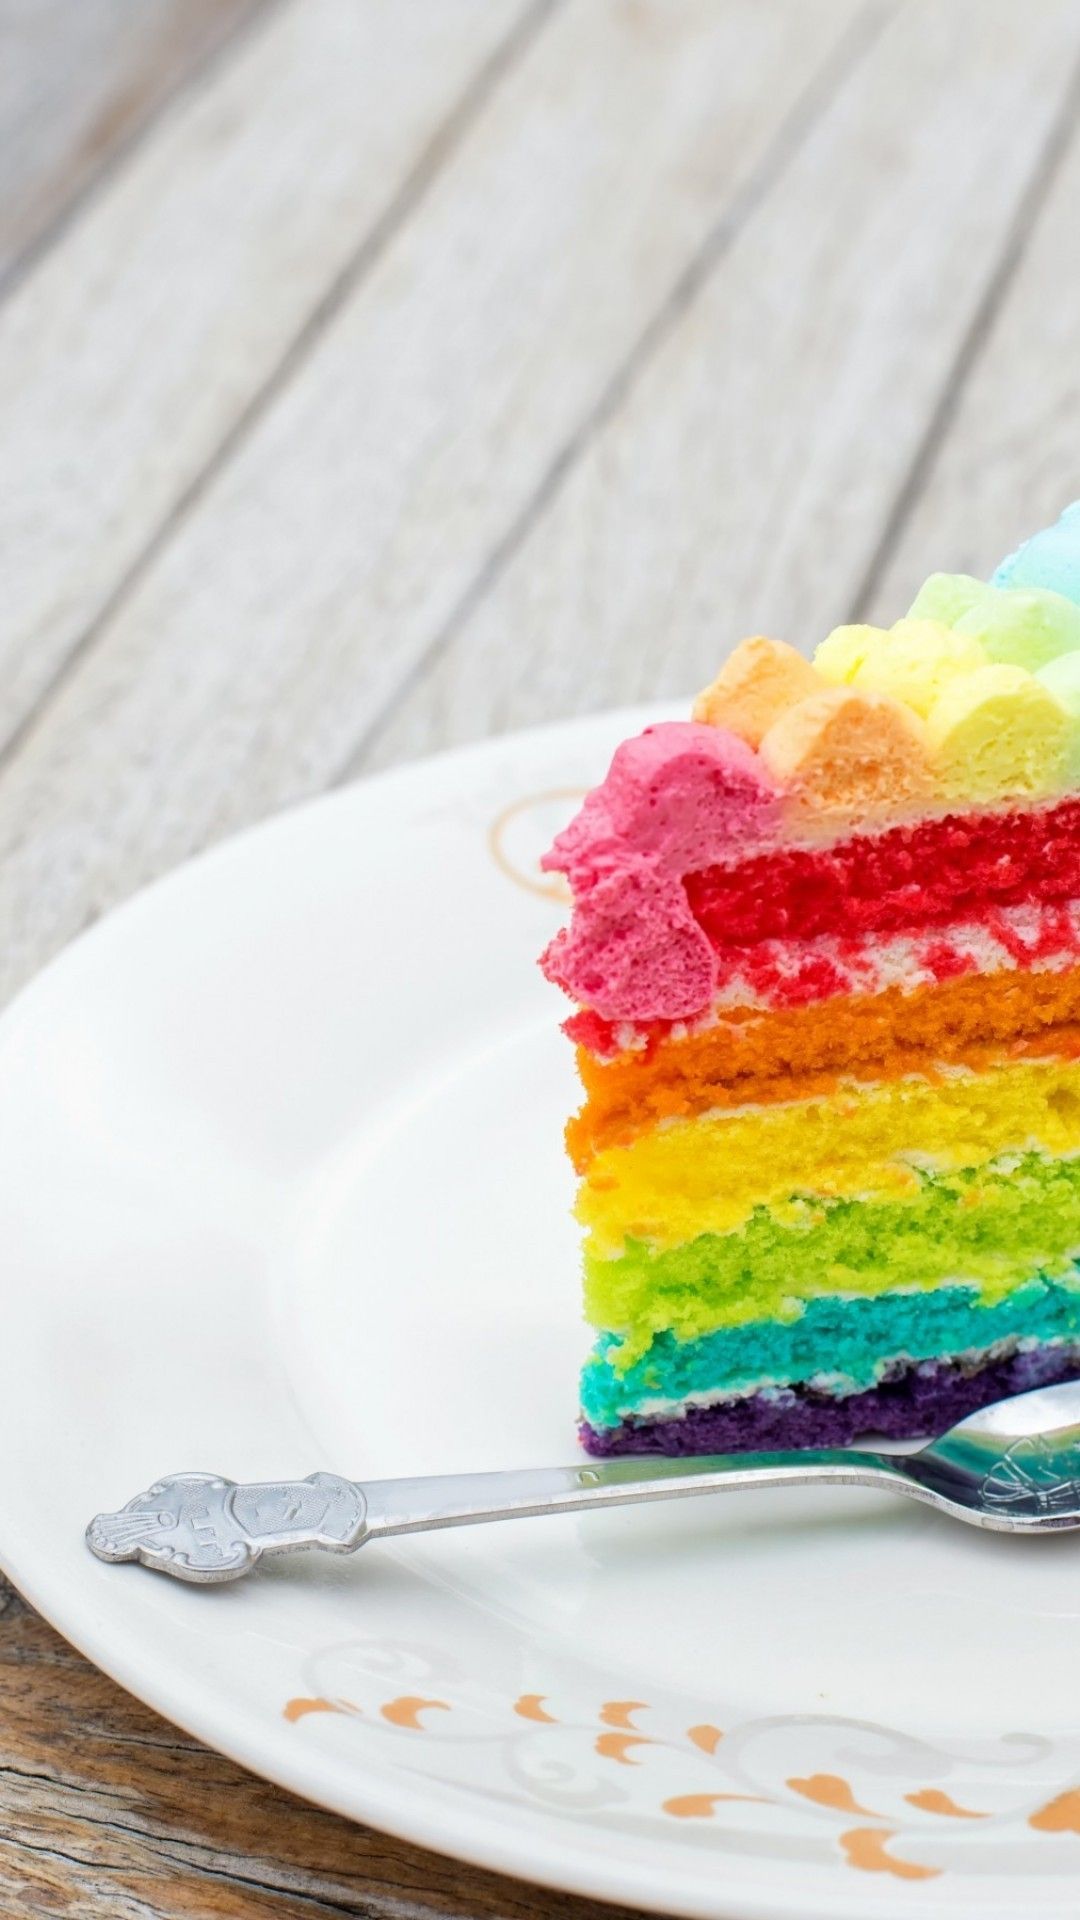 Download 1080x1920 Cake, Rainbow, Colorful, Spoon Wallpaper for iPhone iPhone 7 Plus, iPhone 6+, Sony Xperia Z, HTC One